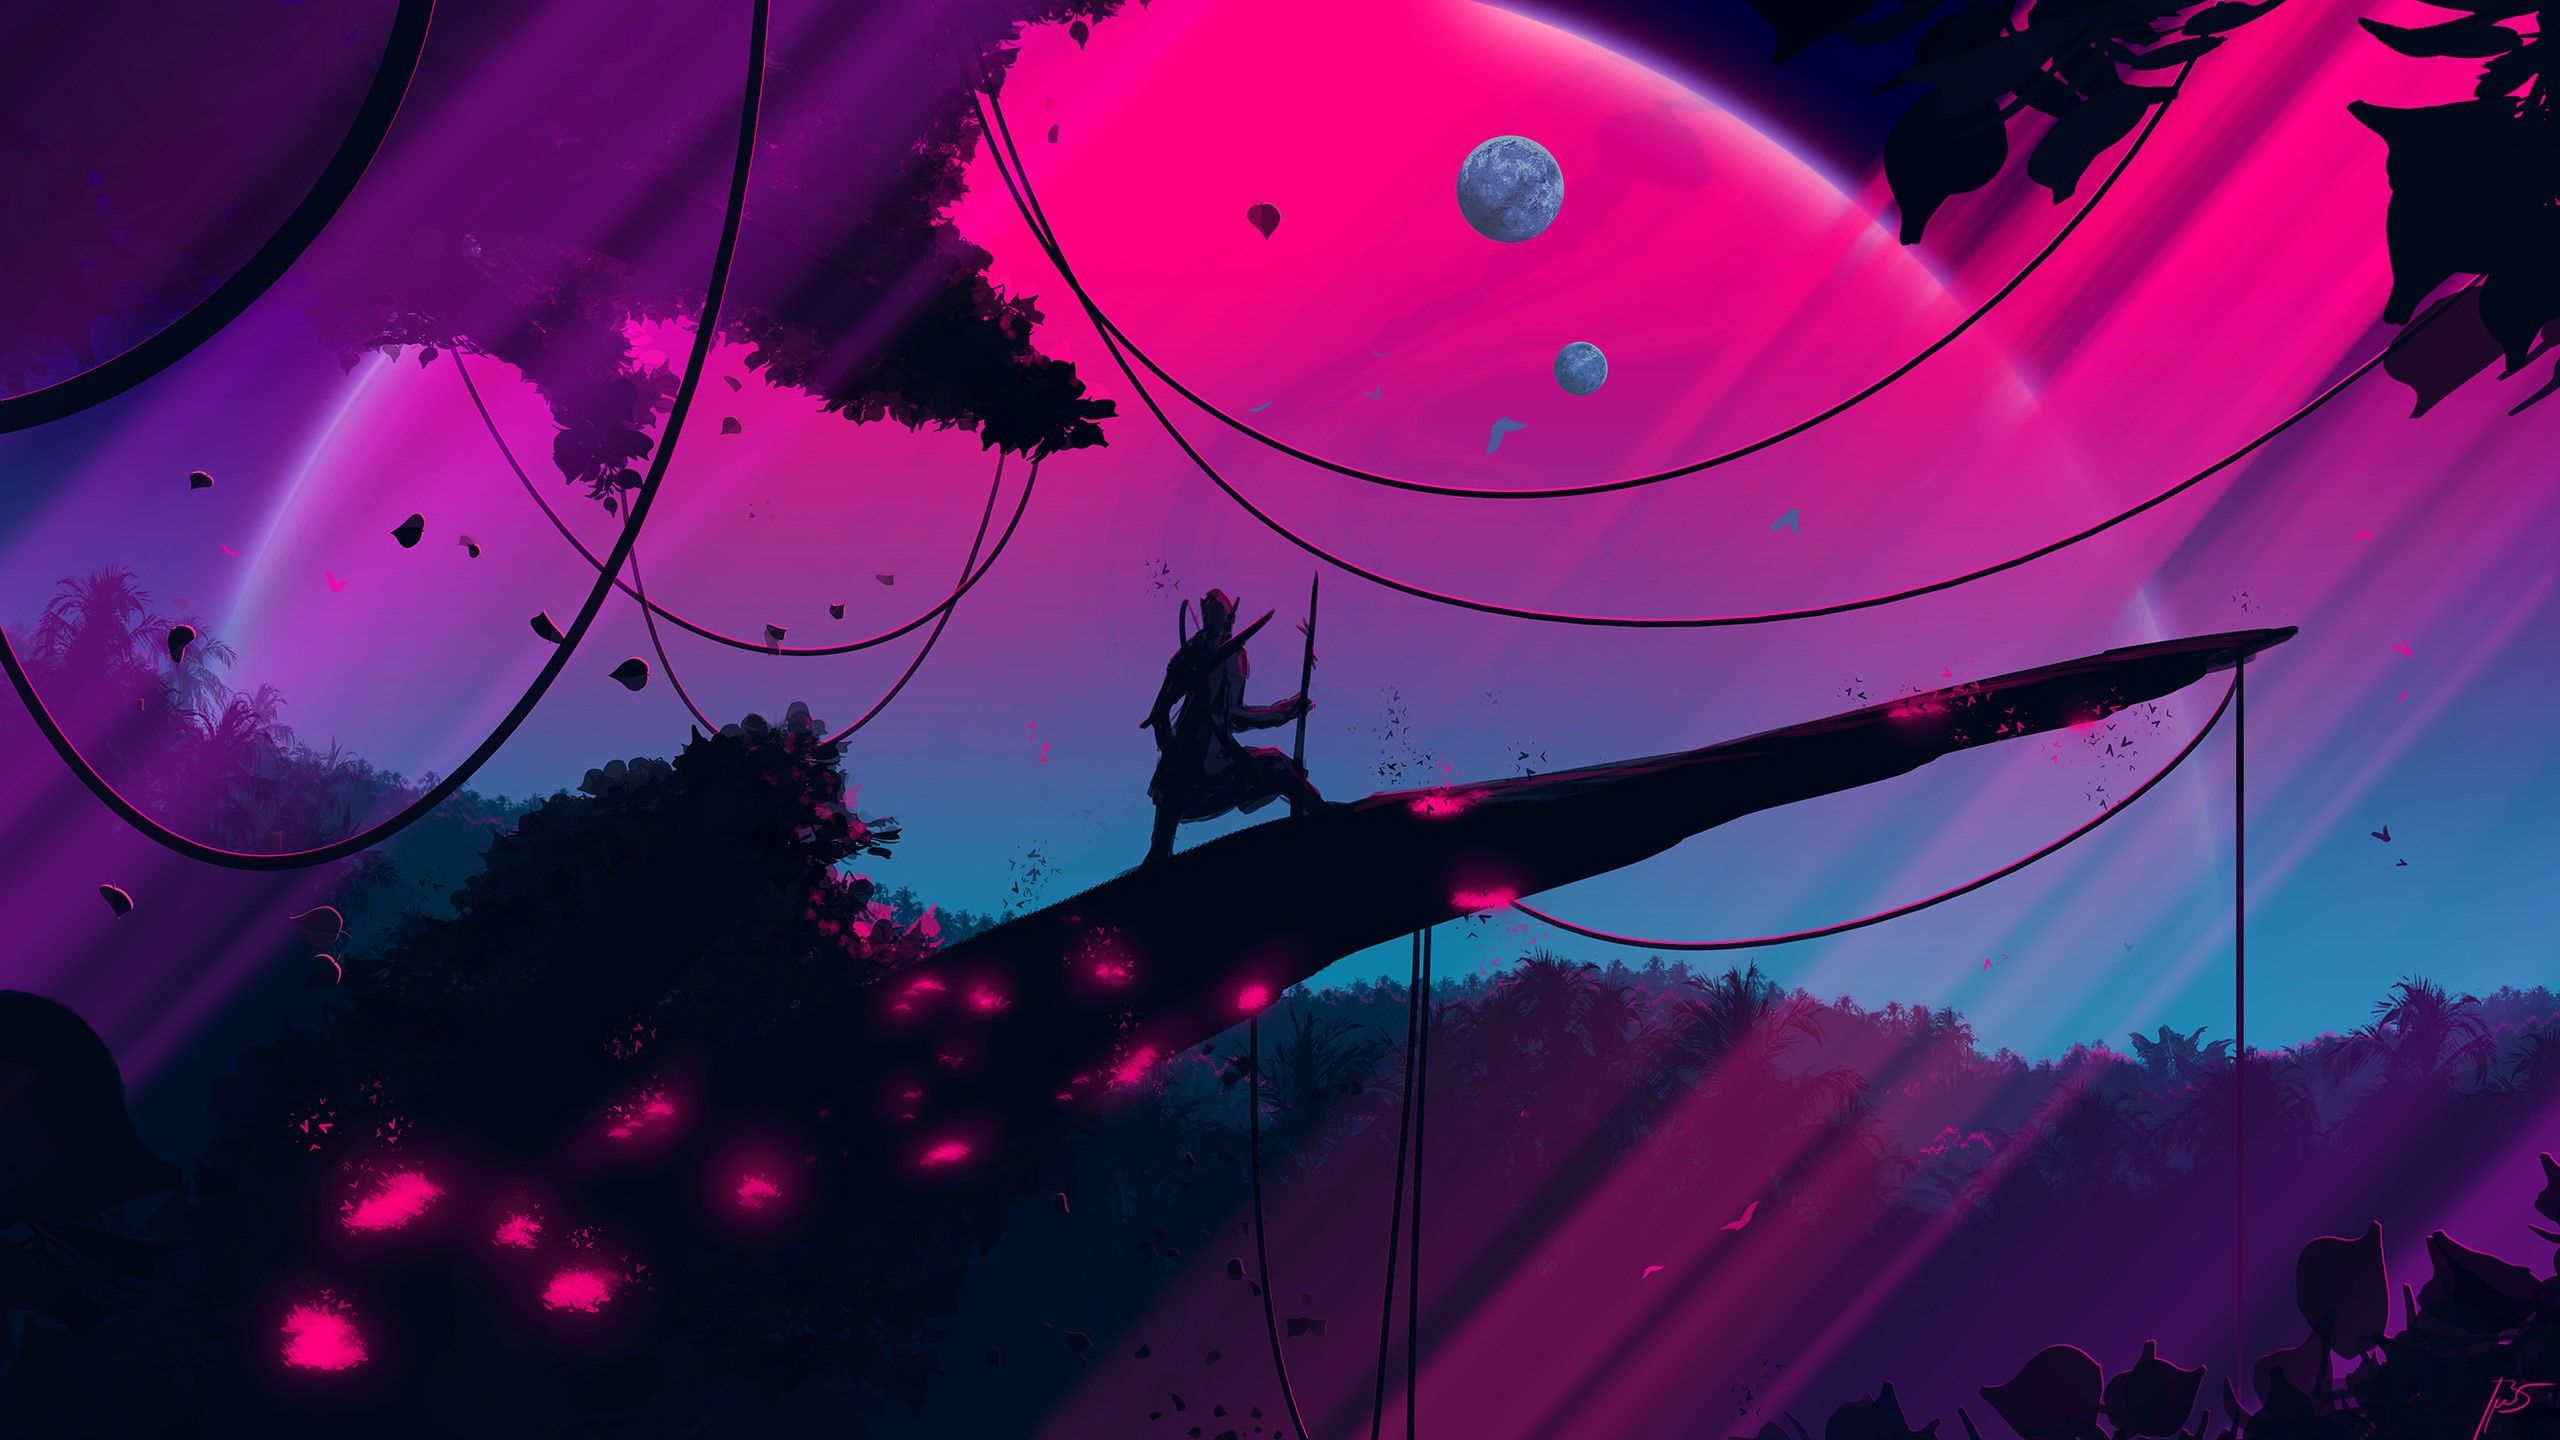 A character from the game Sayonara Wild stands on a tree branch, holding a sword, with a purple and pink sky in the background - 2560x1440